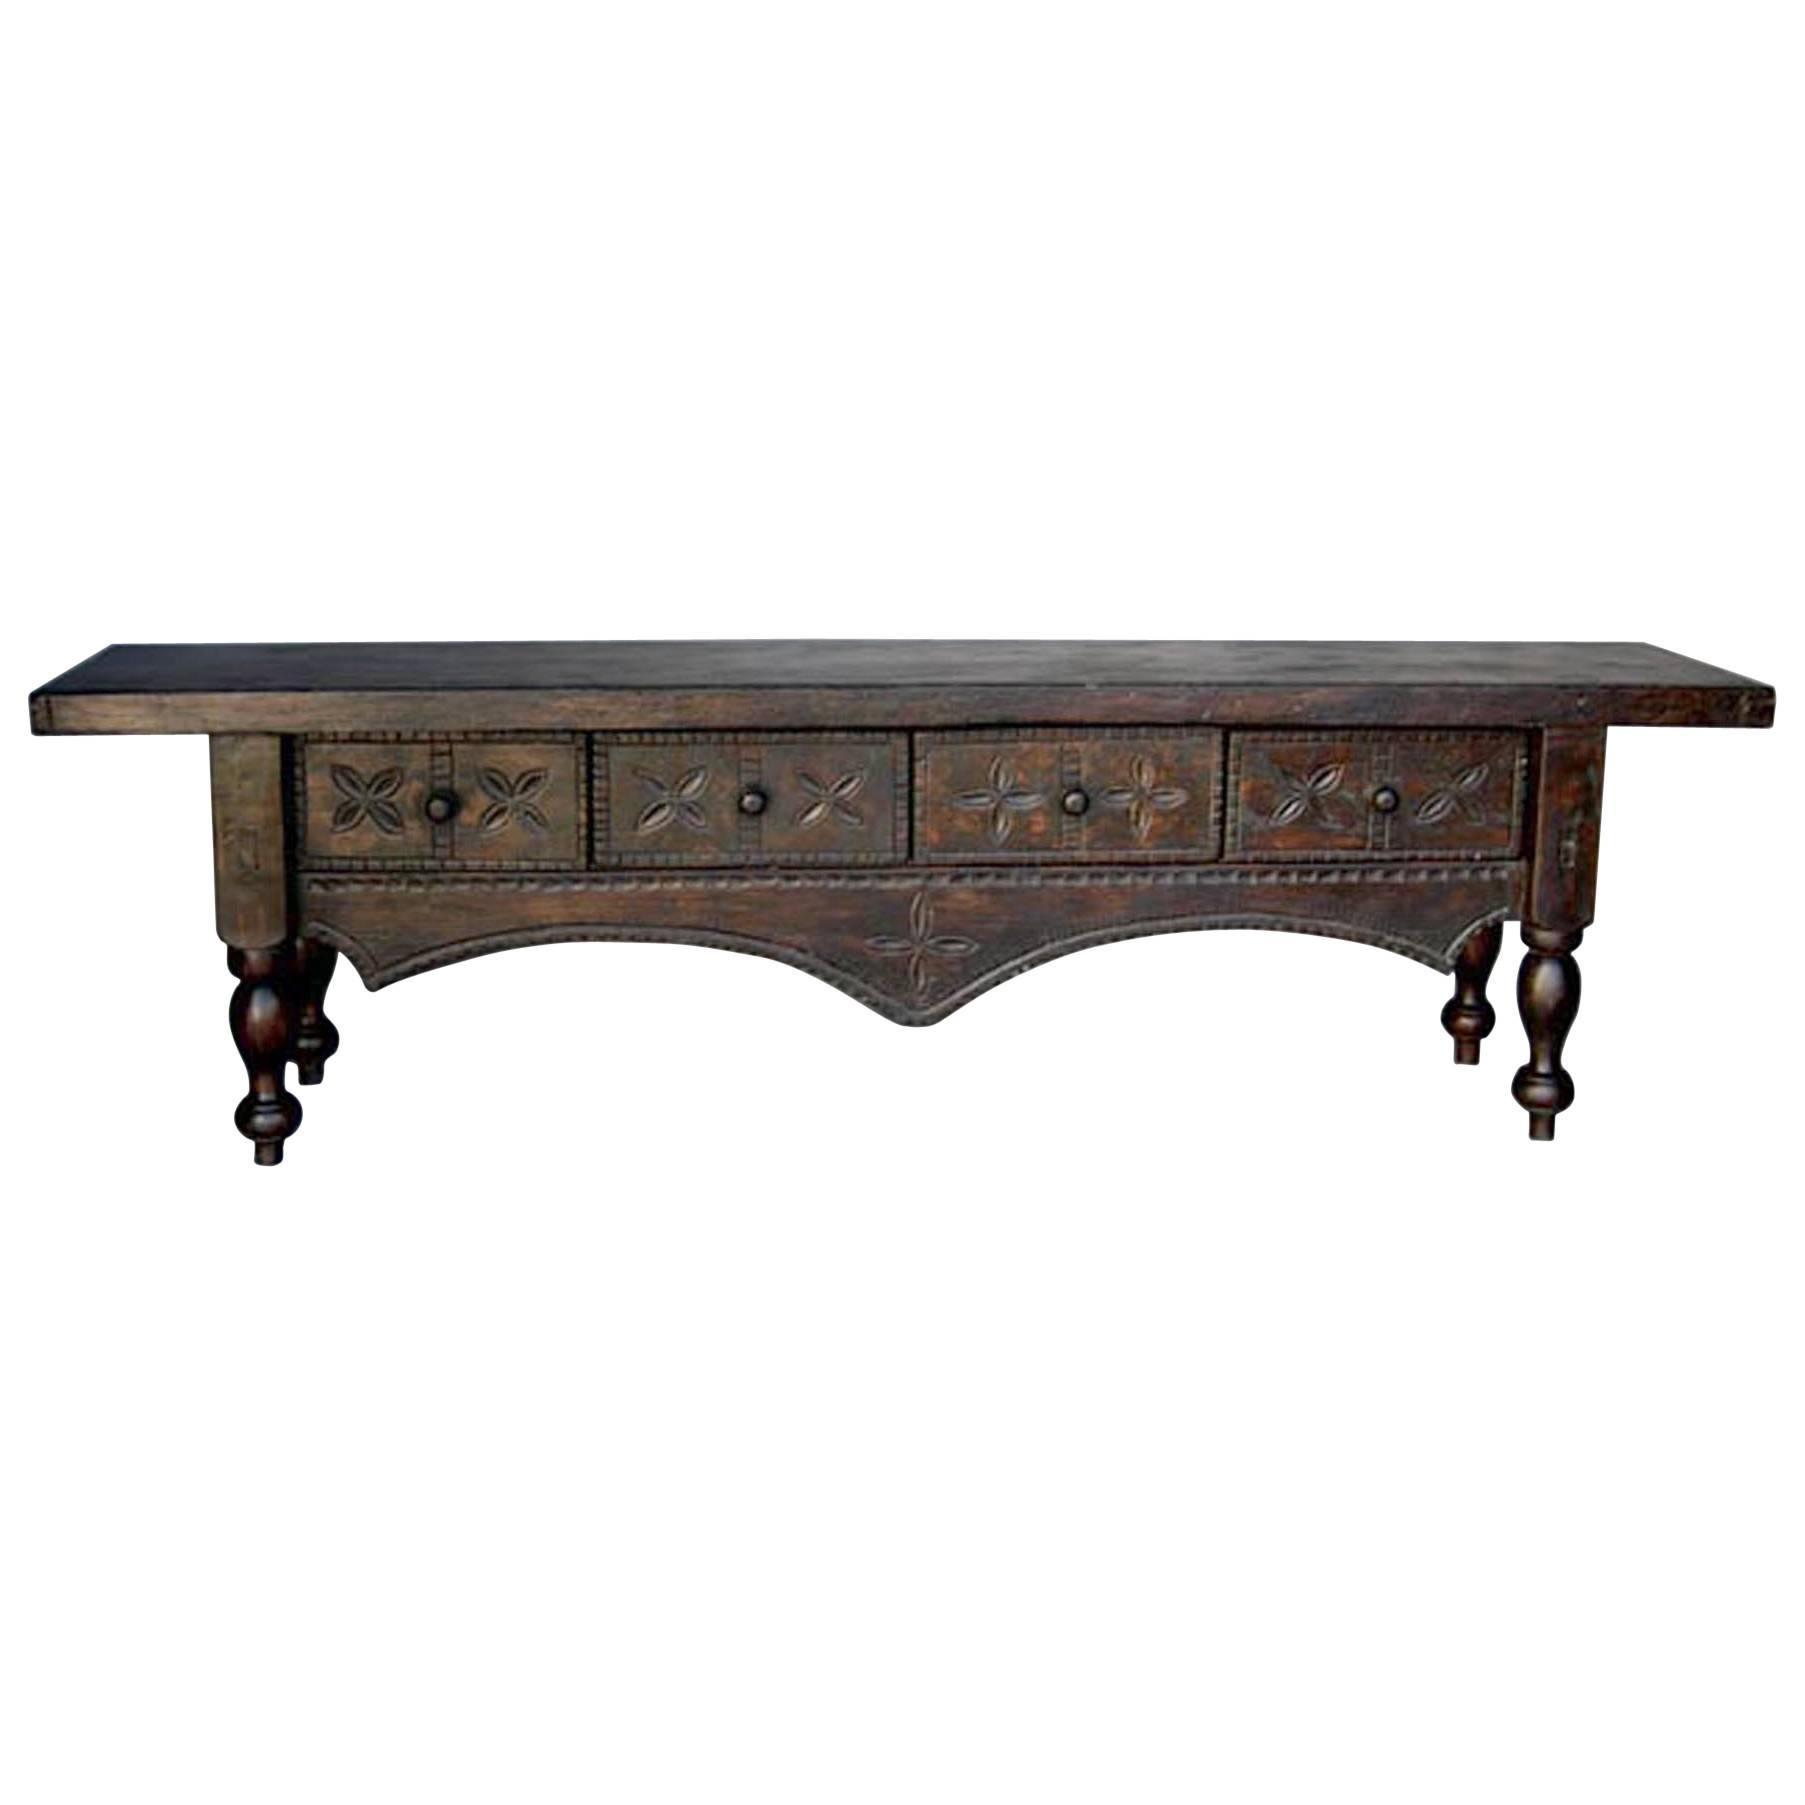 Custom Carved Wood Console With Turned Legs and Drawers